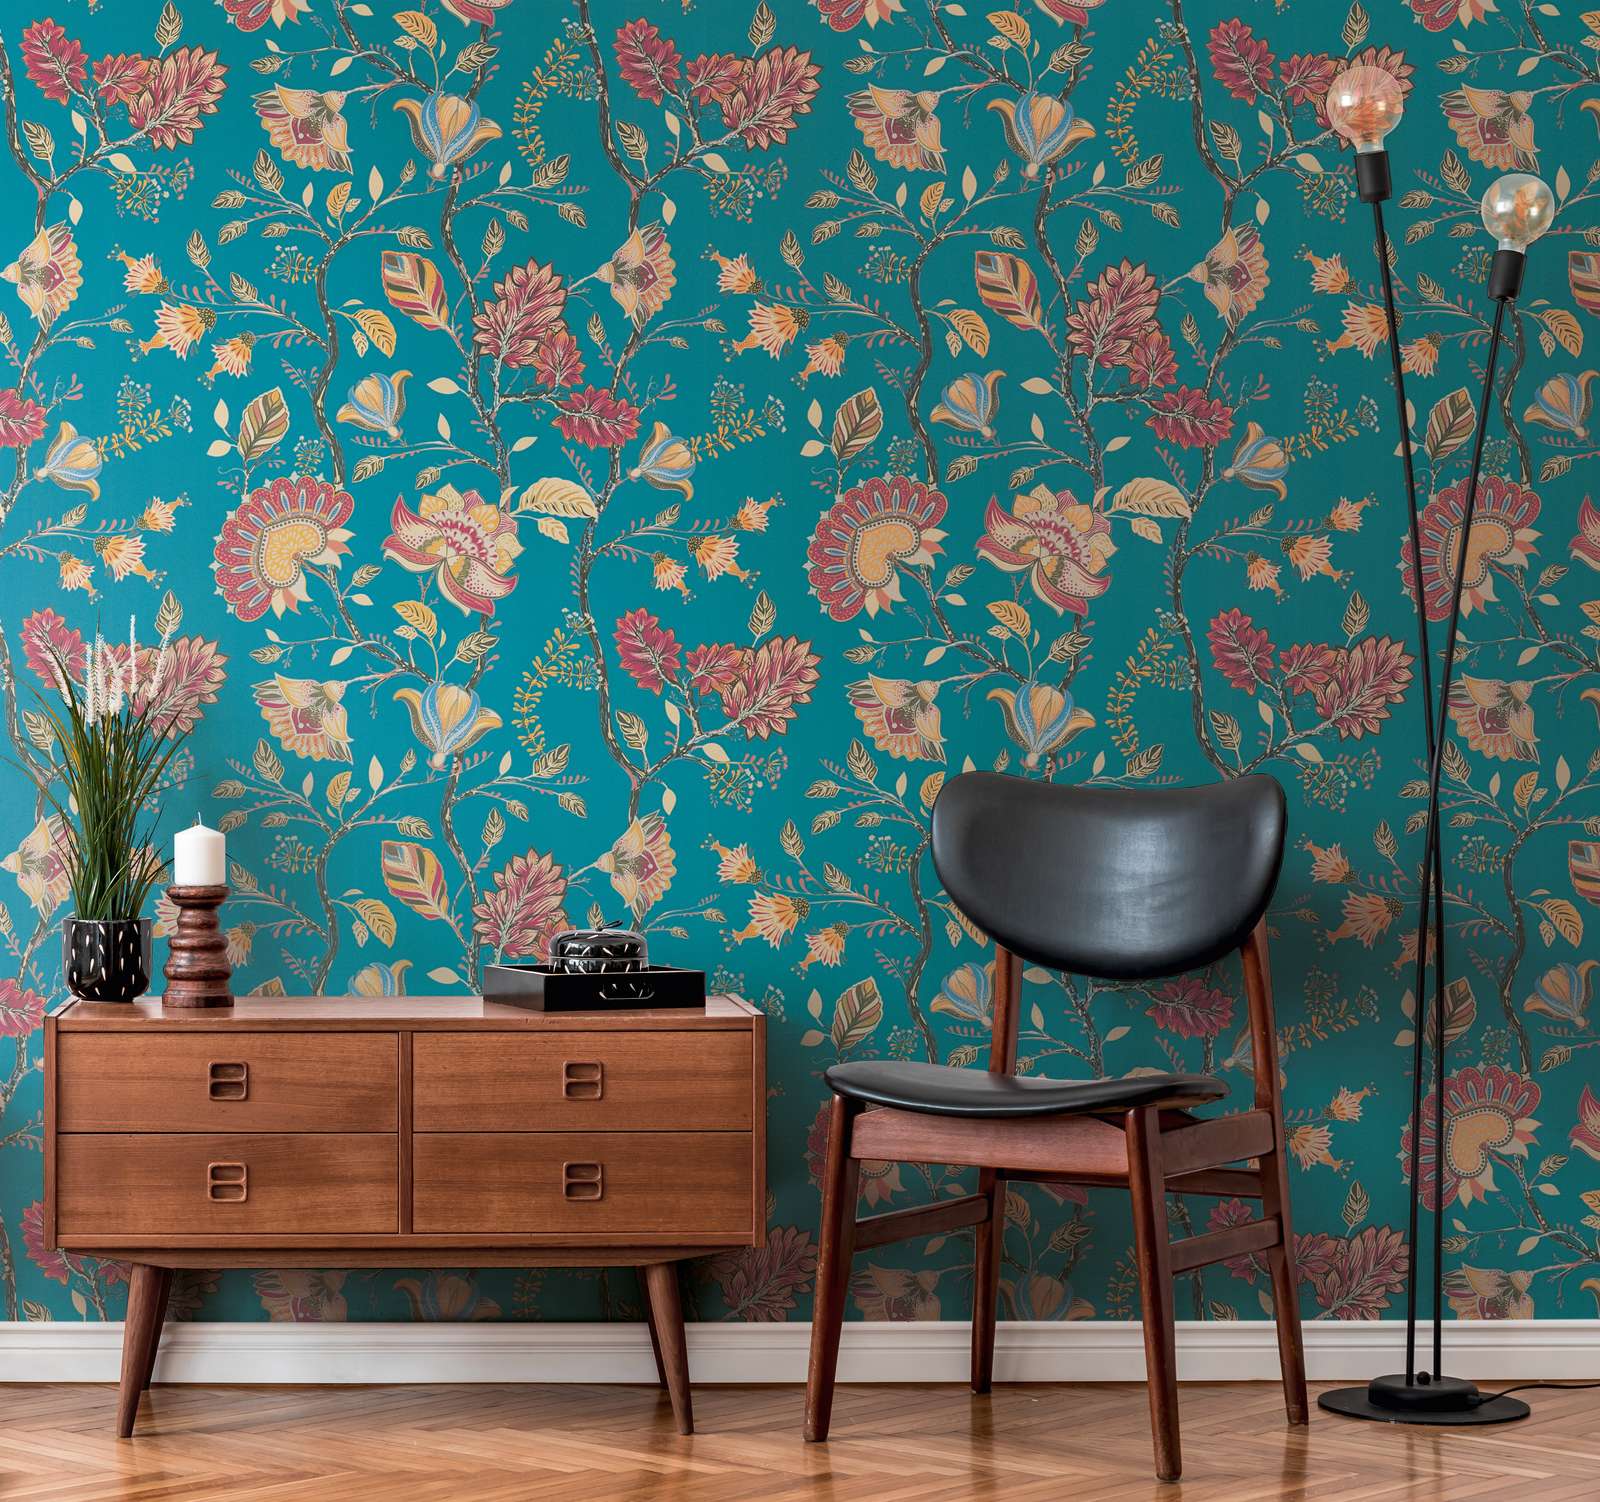             Non-woven wallpaper with floral colourful pattern - blue, yellow, red
        